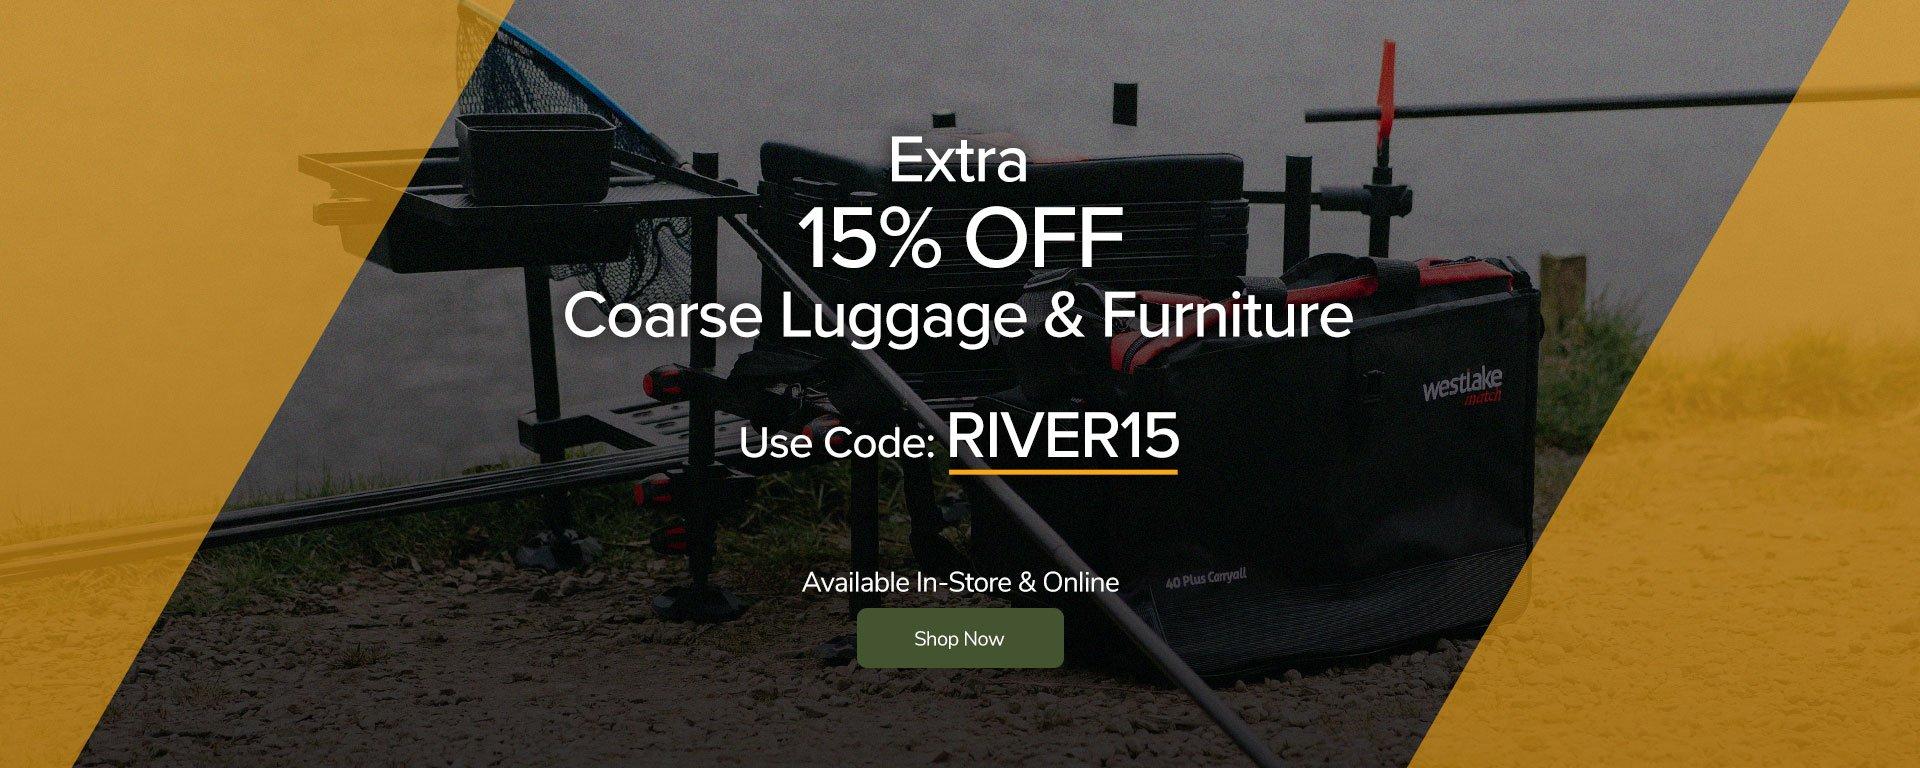 Get An Extra 15% OFF with code RIVER15